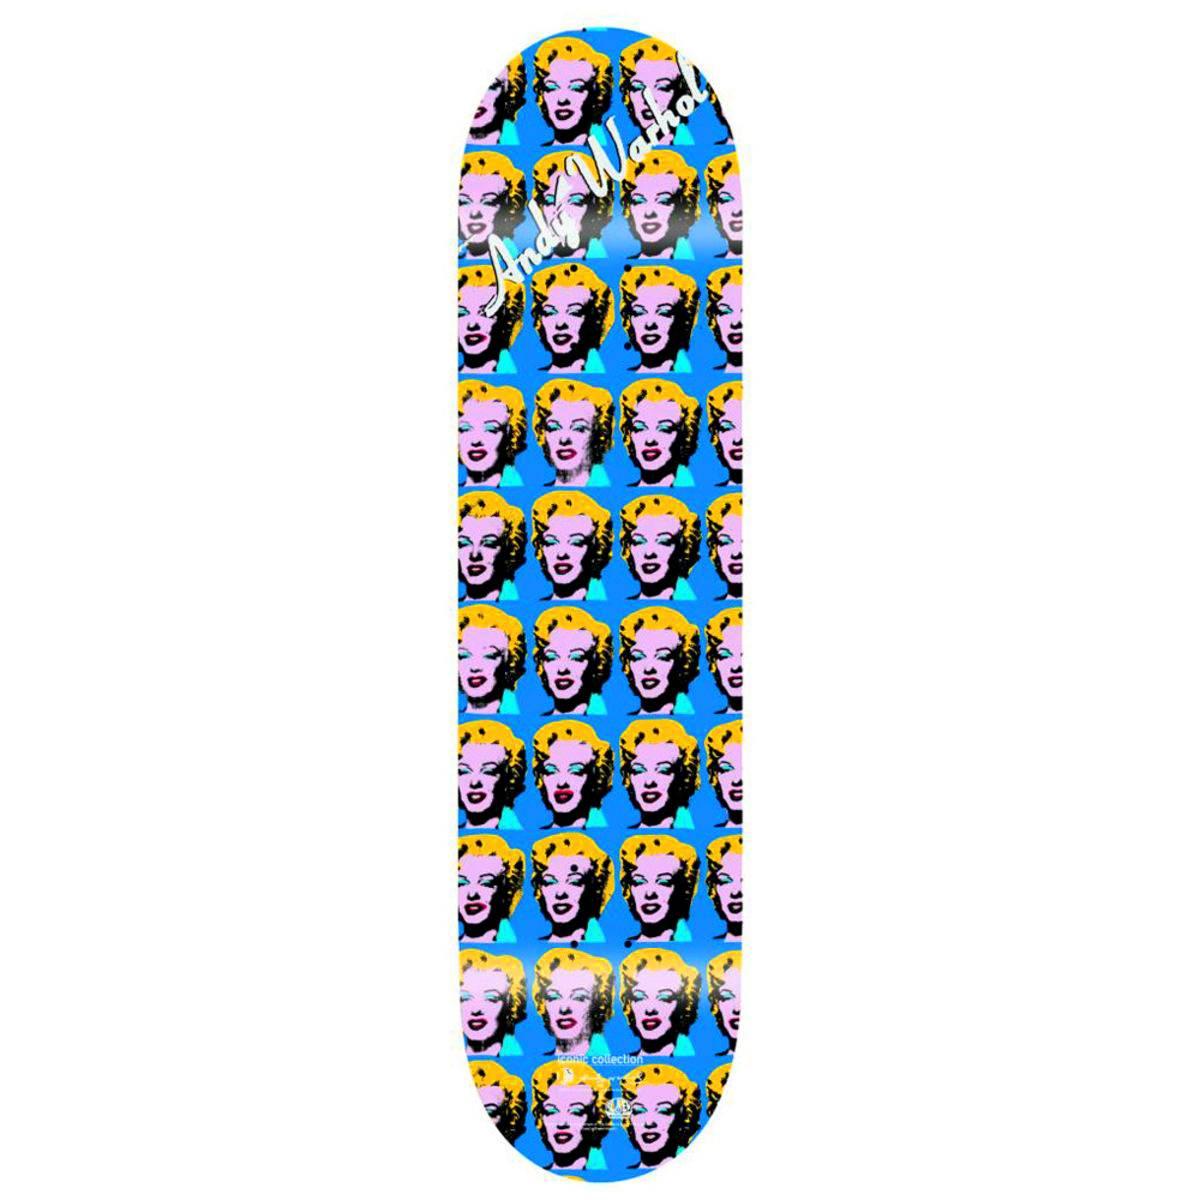 Rare Out of Print Andy Warhol Marilyn Skate Deck: New in its original packaging. One of the more sought after Warhol decks of all.

This work originated circa 2009 as a result of the collaboration between Alien Workshop and the Andy Warhol